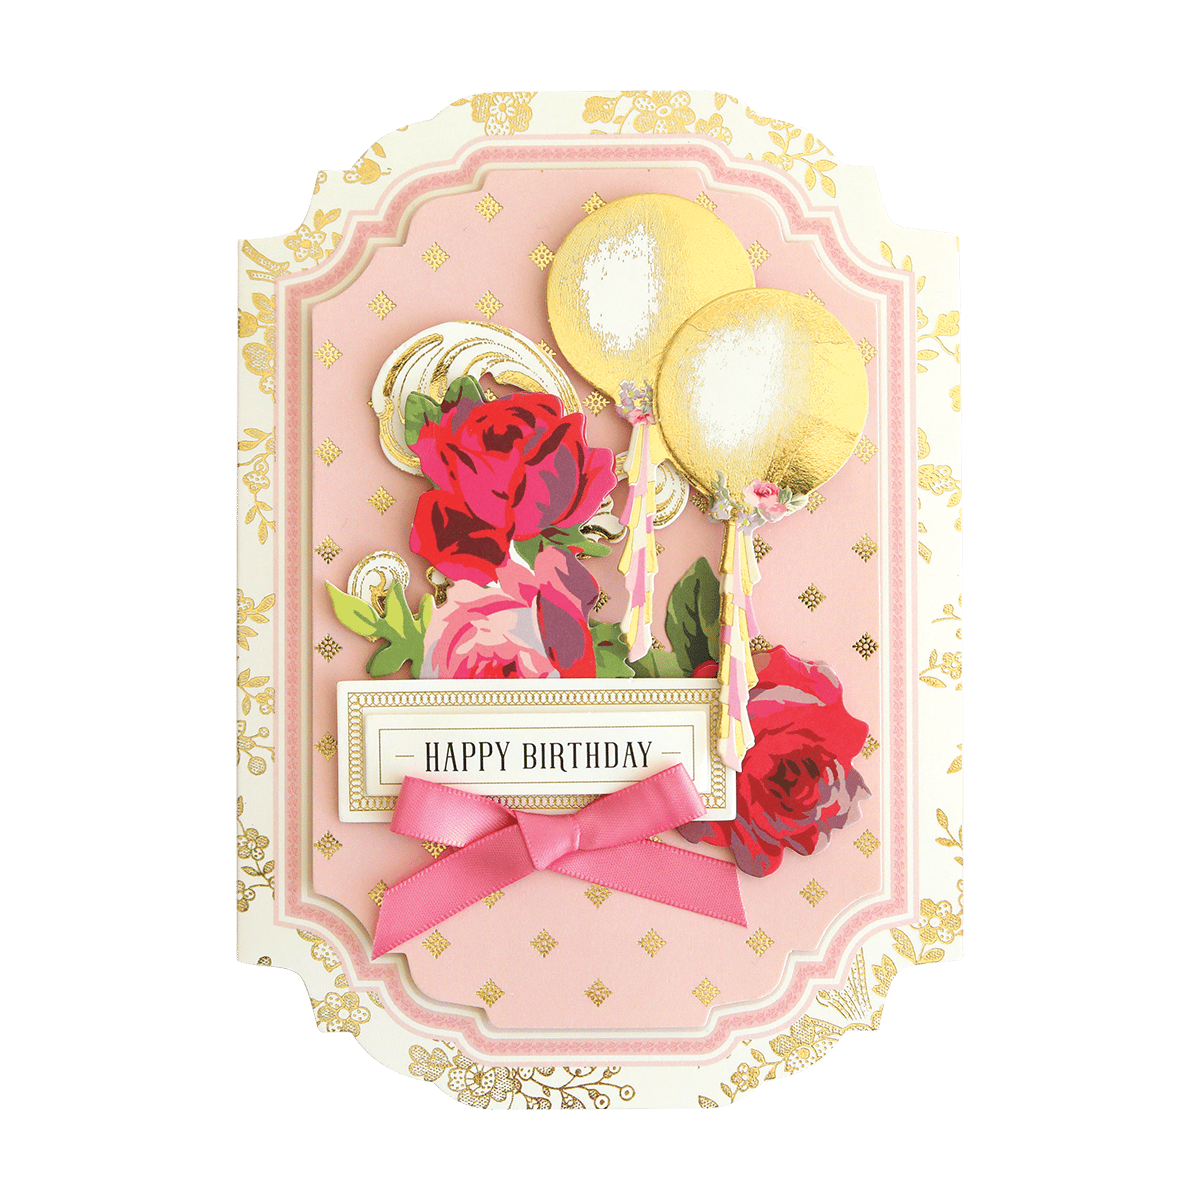 a birthday card with roses and balloons.